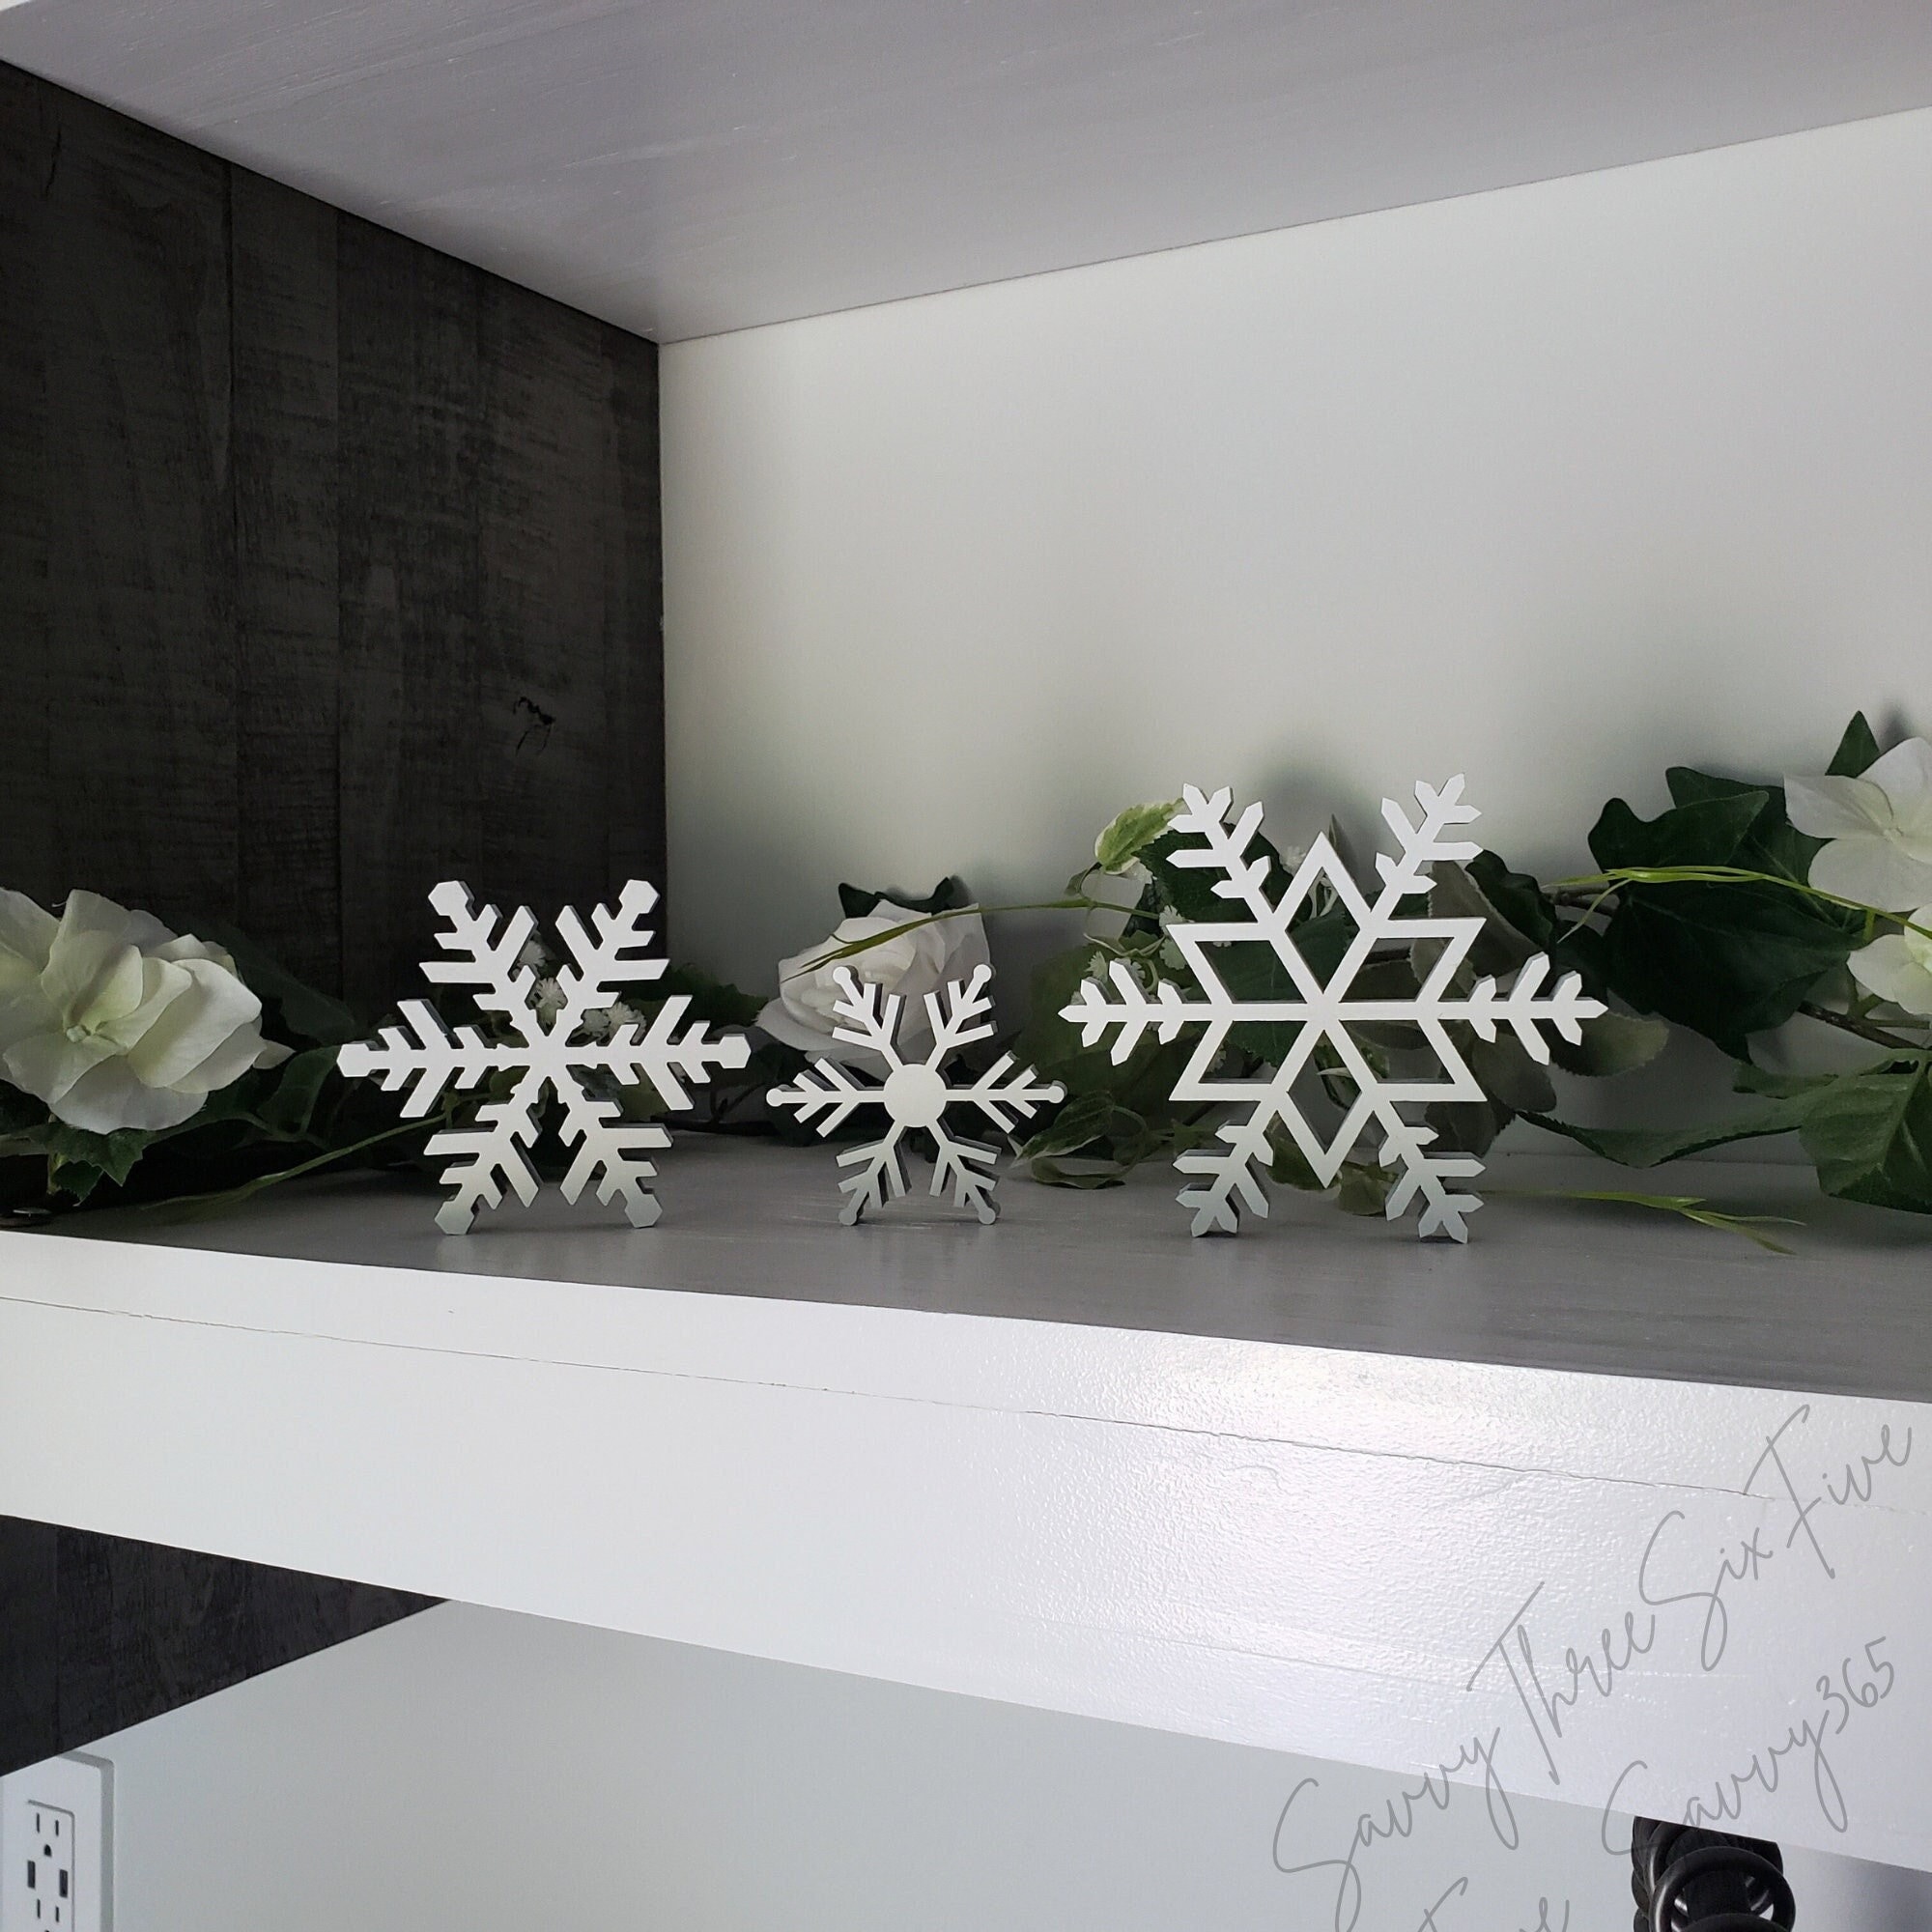 10 Pieces Christmas Wooden Snowflake Decor Winter Snowflake Signs Tabletop Decorations Standing Wood Tiered Tray Decorations for Christmas Winter